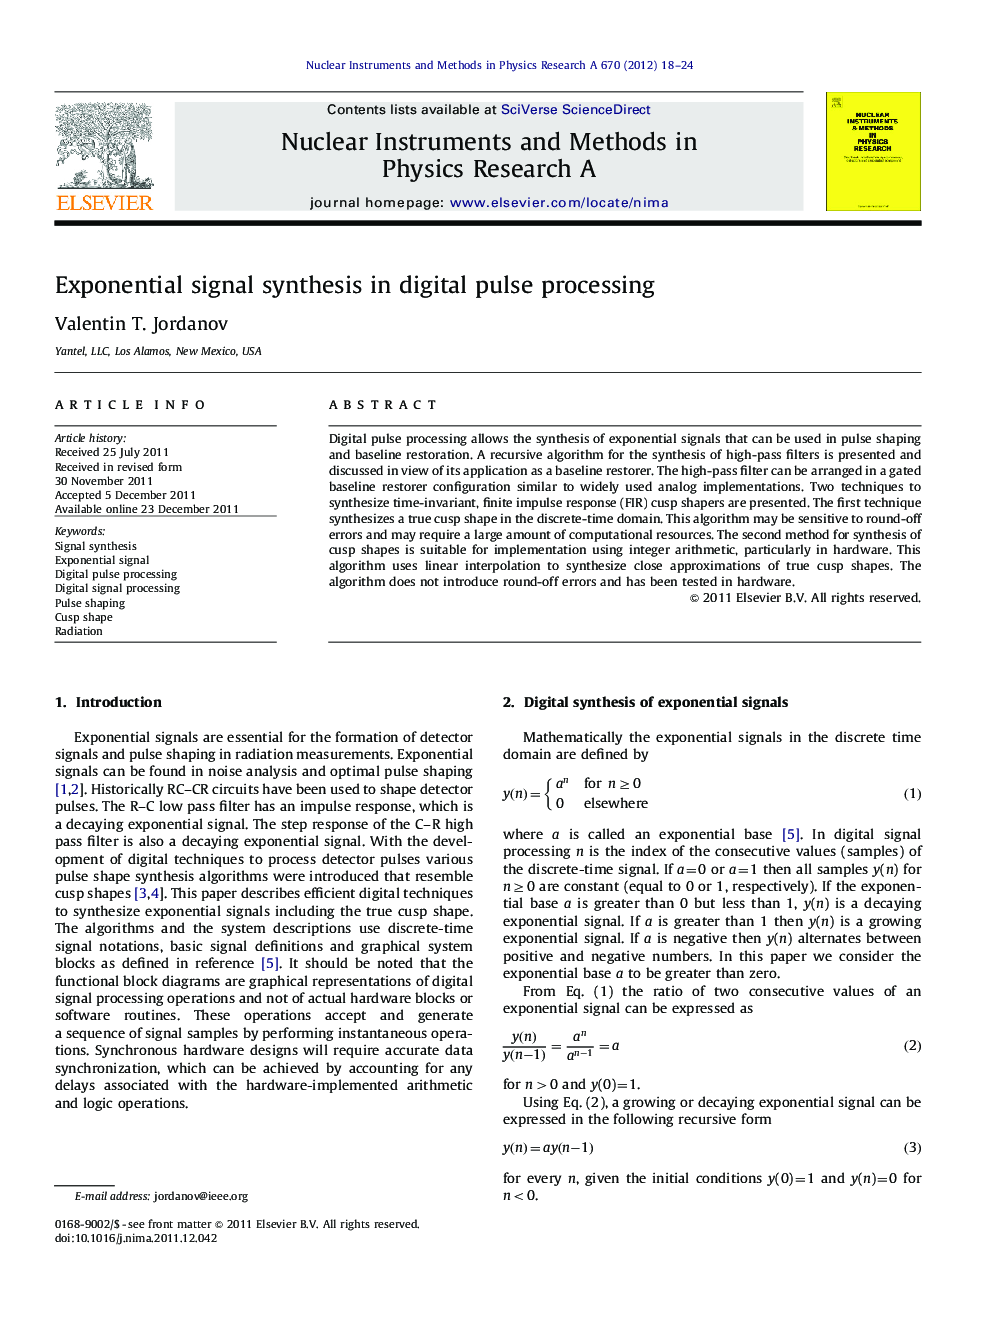 Exponential signal synthesis in digital pulse processing